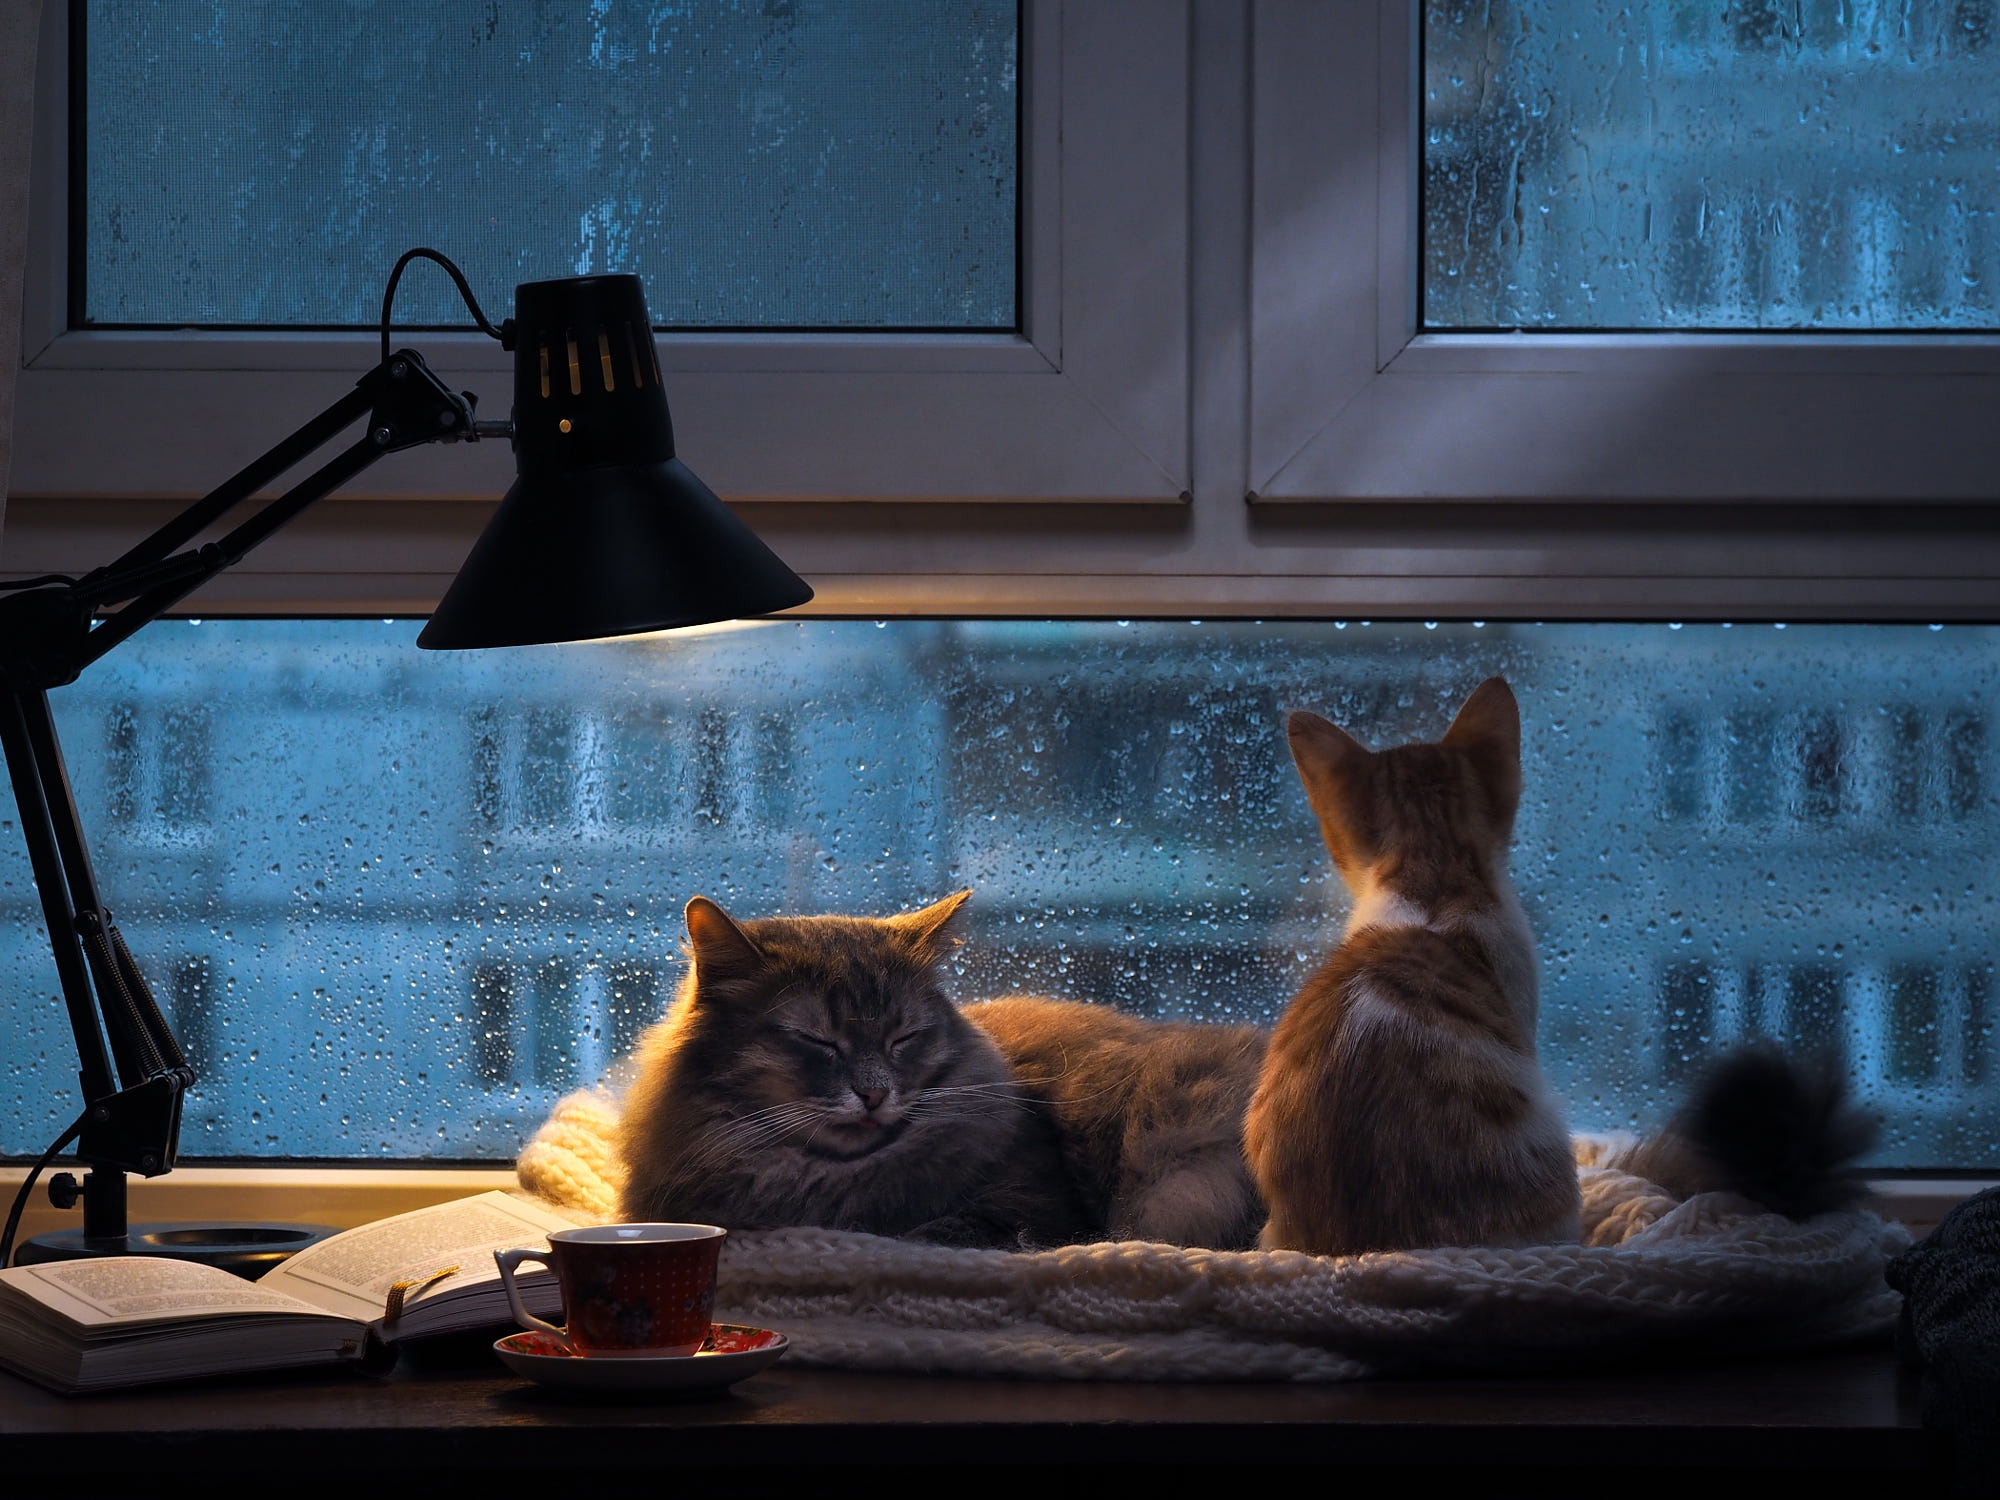 General 2000x1500 indoors rain lamp animals cats by the window